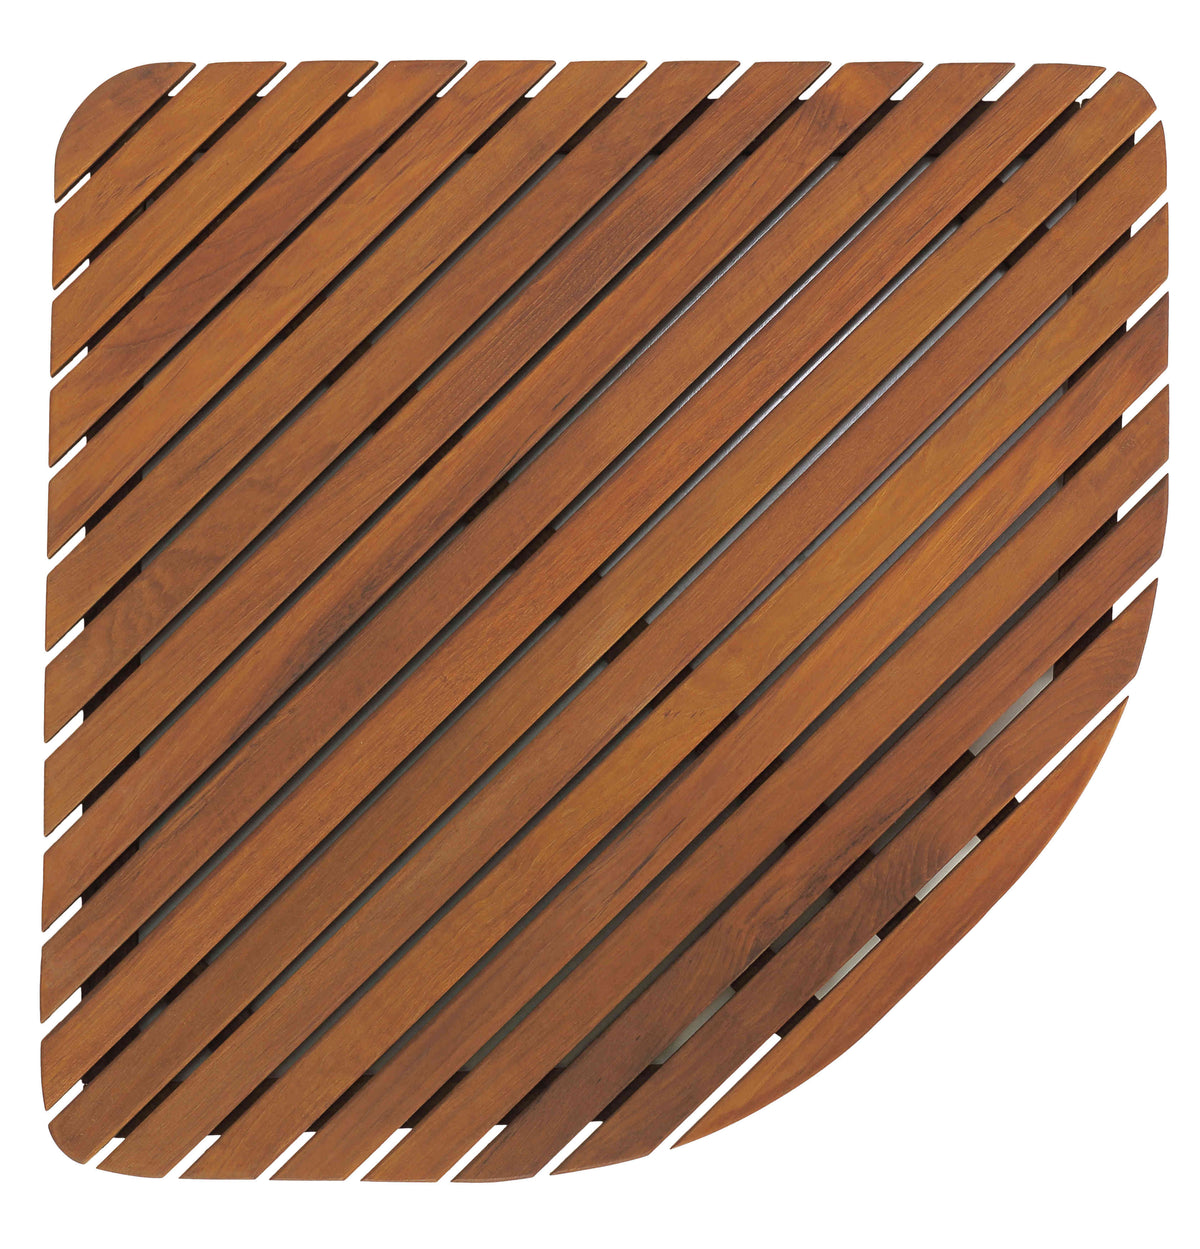 Bare Decor Dania Corner Shower Spa Mat in Solid Teak Wood and Oiled Finish, 24&quot; x 24&quot;